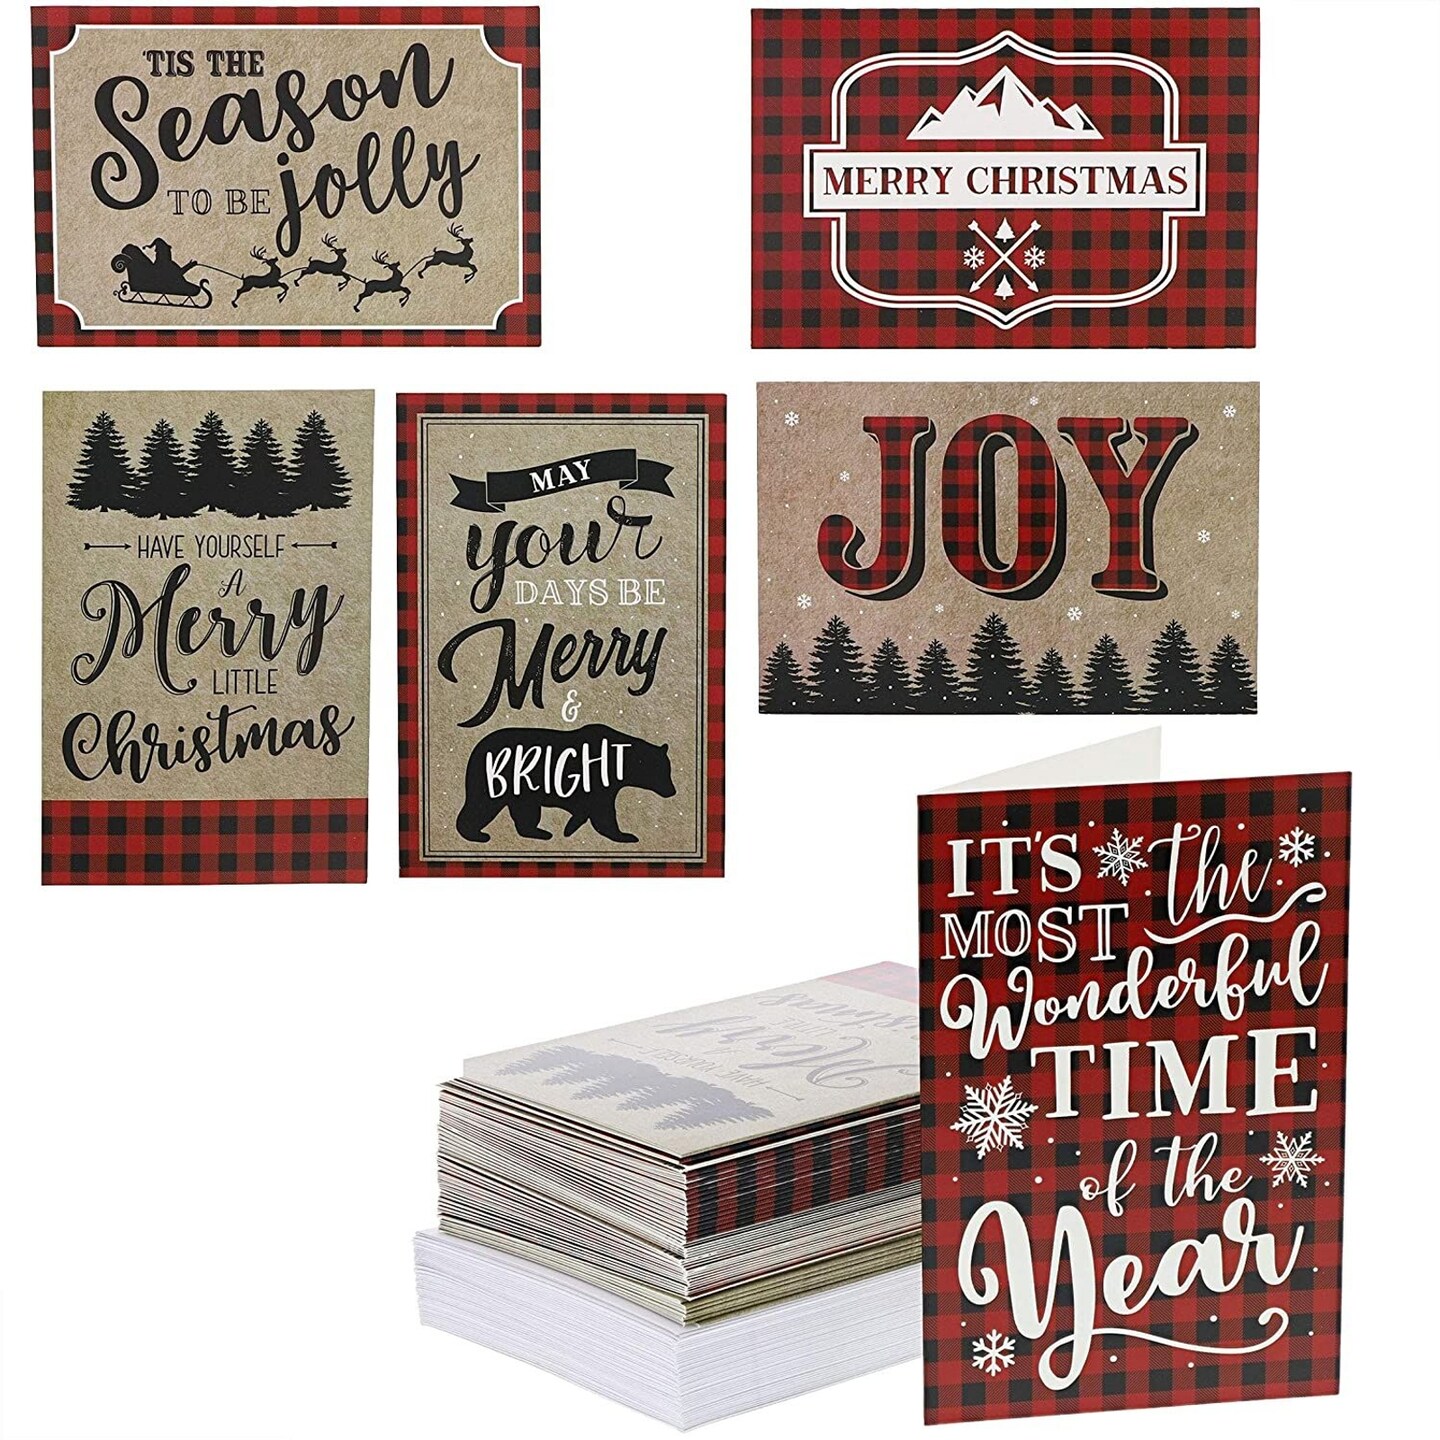 48 Pack Merry Christmas Greeting Cards with Envelopes, Assorted Bulk Set Red Plaid Design (4 x 6 In)